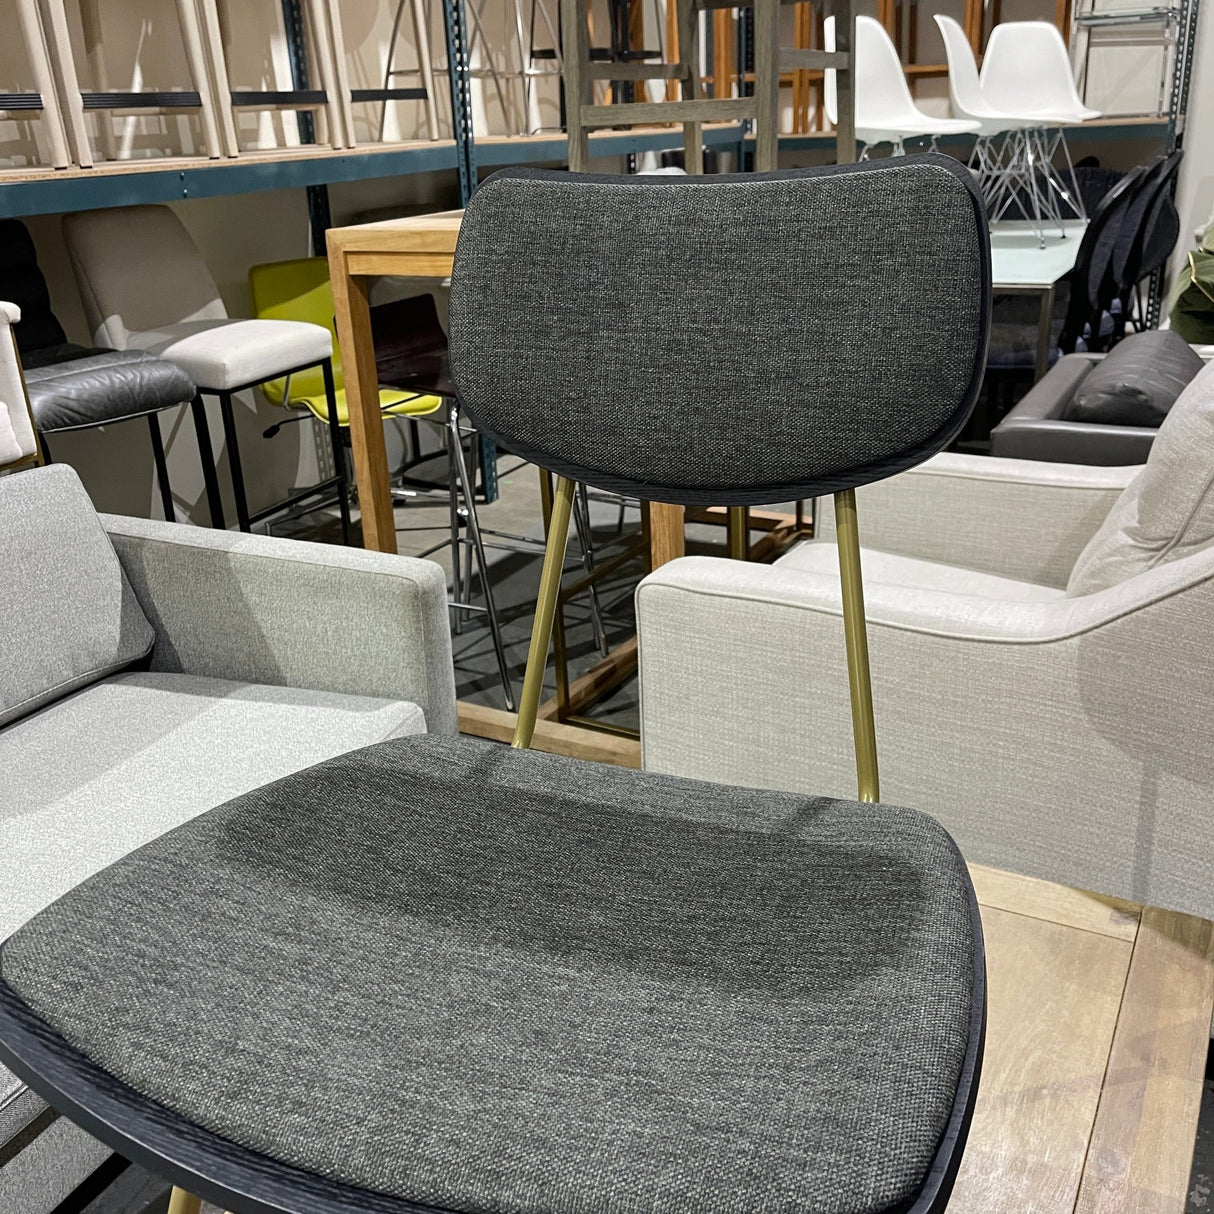 4 Inside weather Latte Kobe Side Chair in Pacific Waters - enliven mart